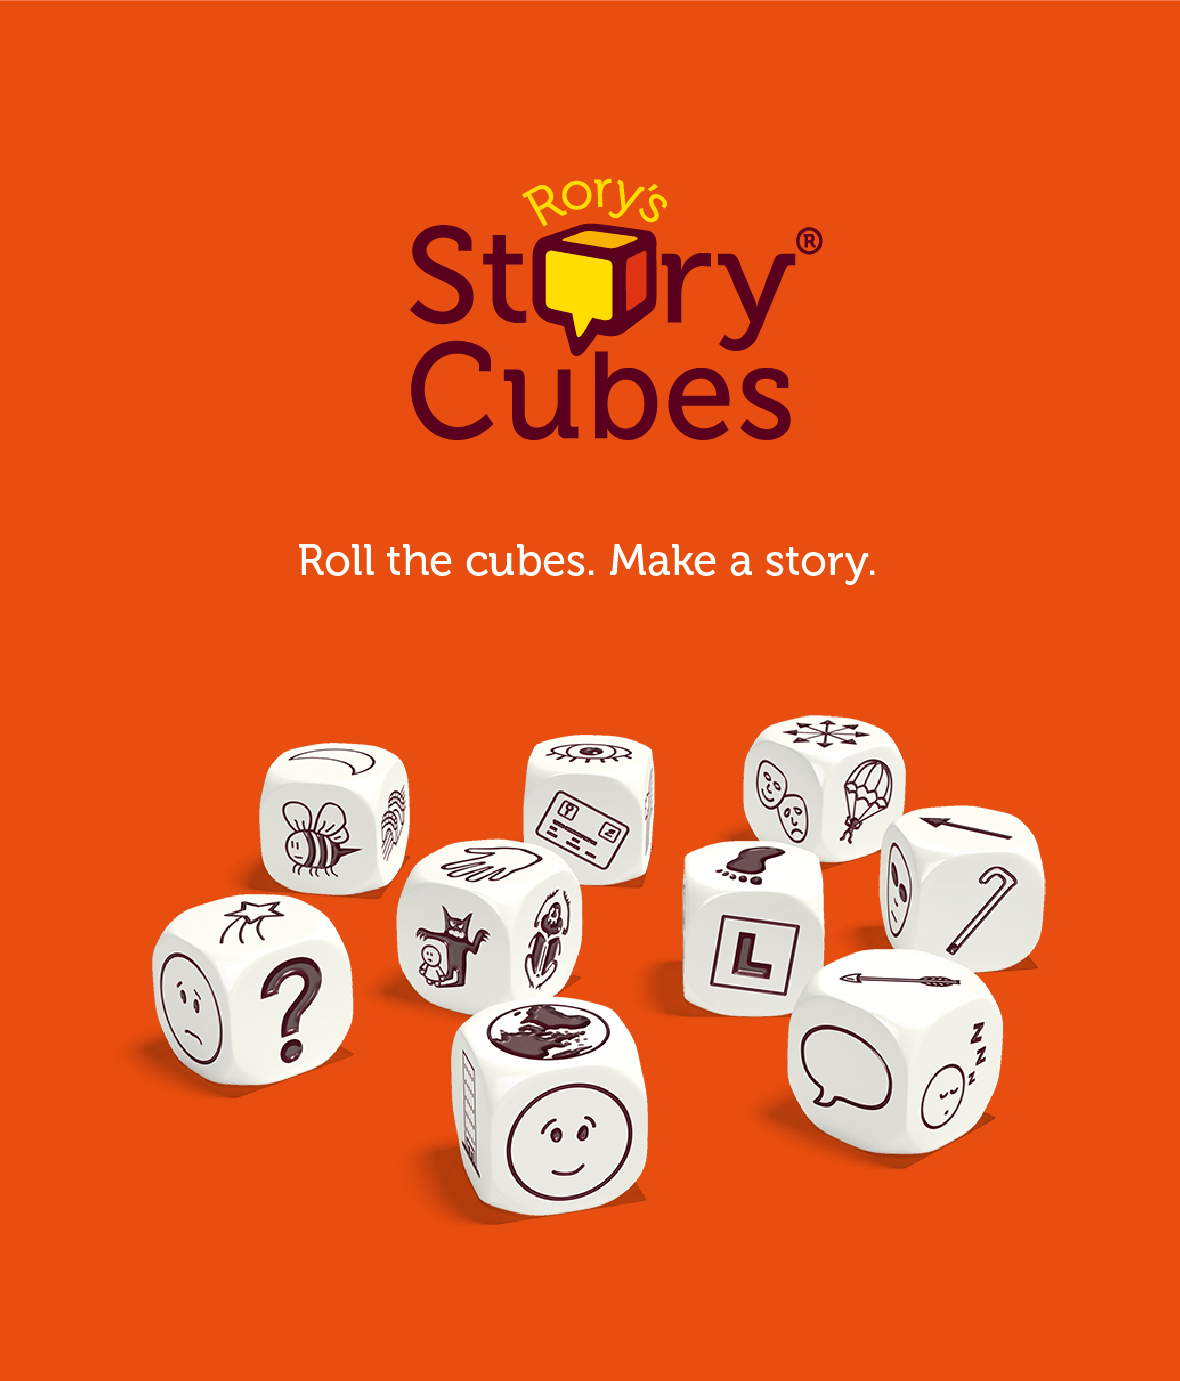 Form Native  Rory's Story Cubes